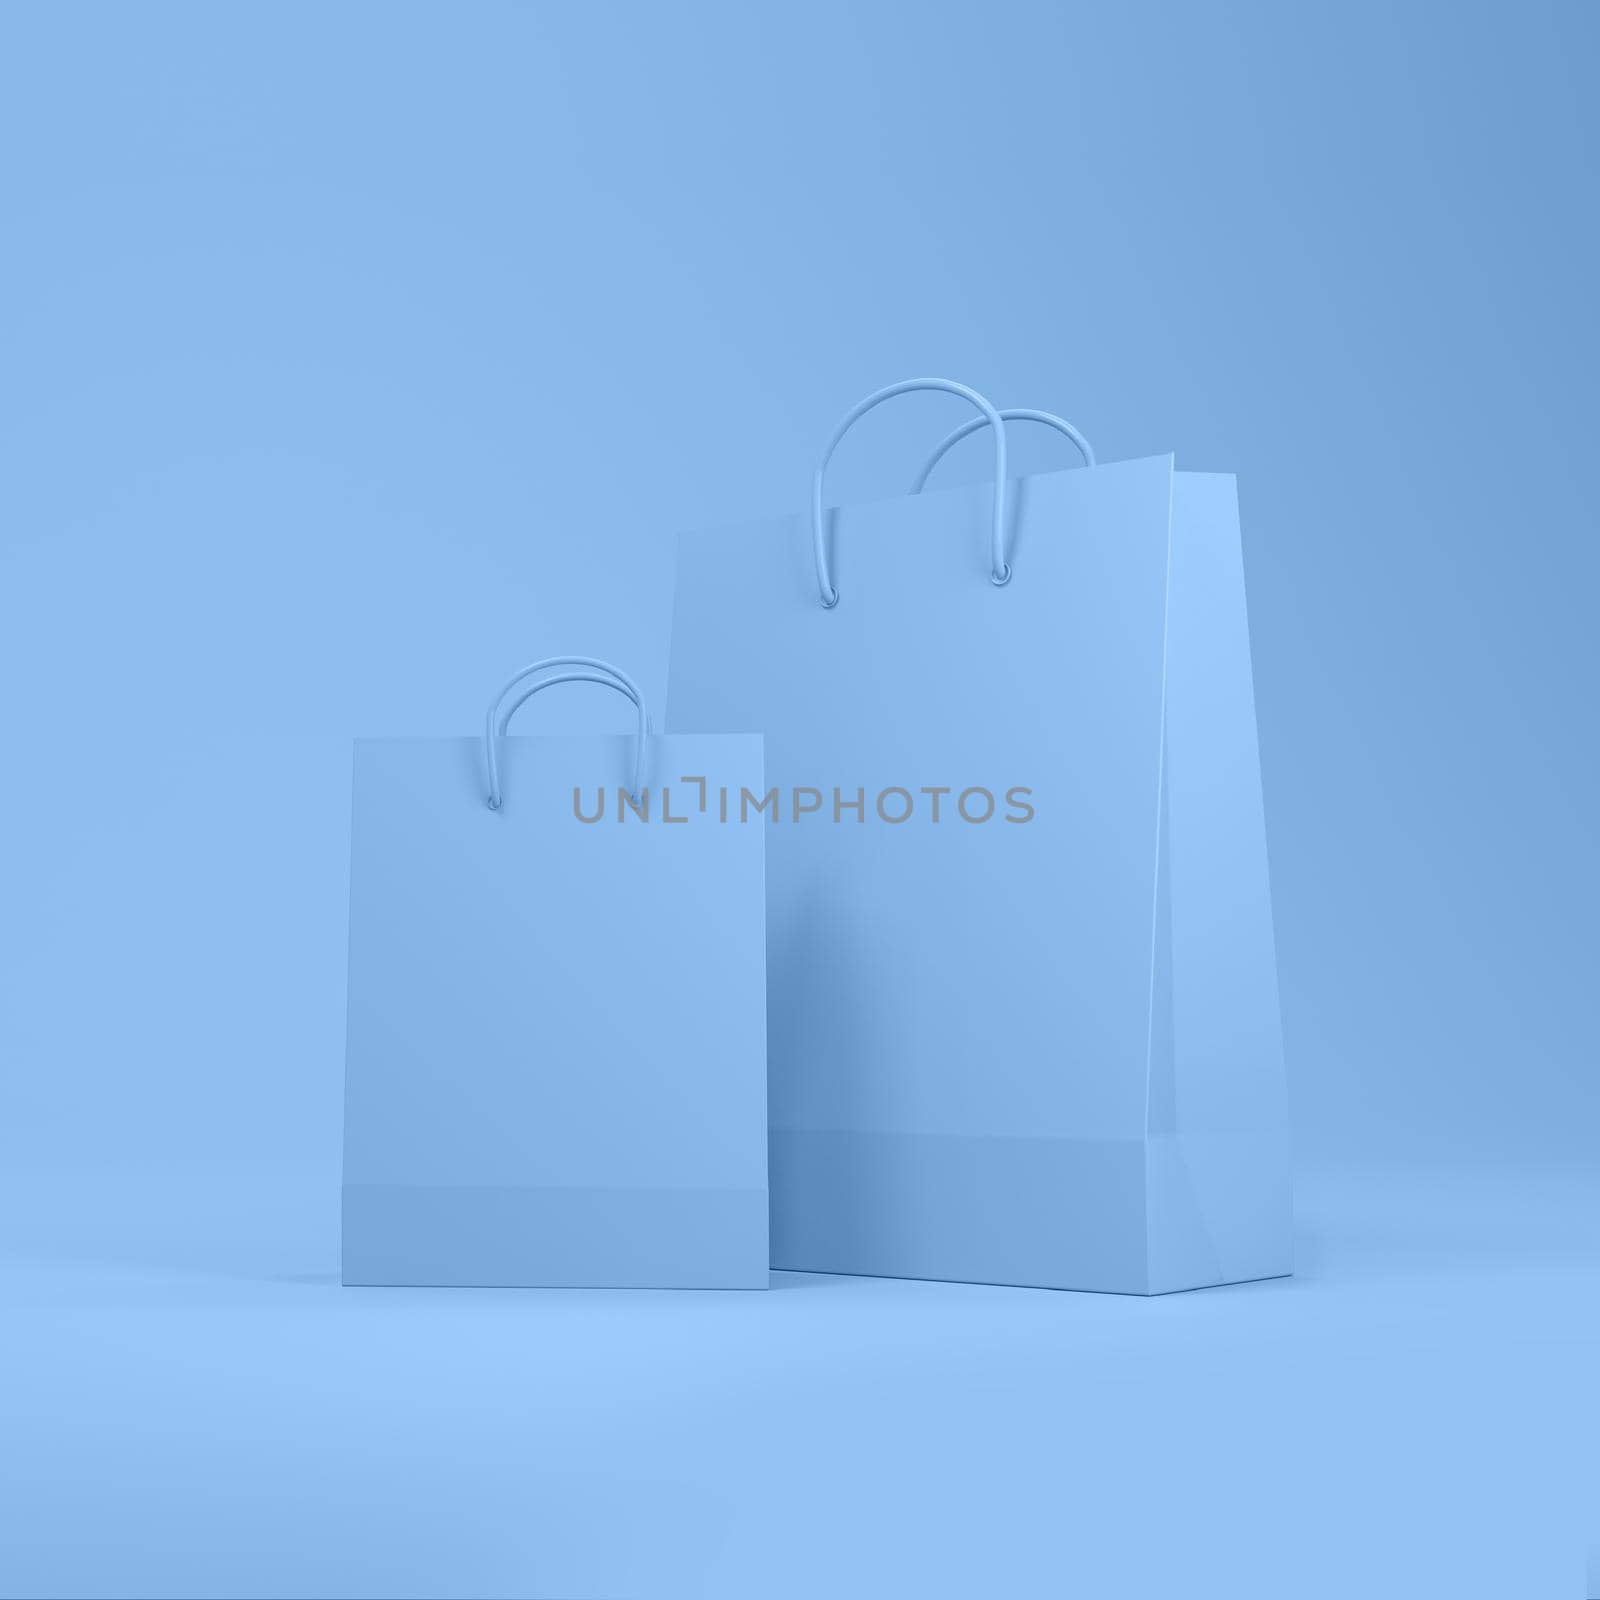 Shopping bags in blue background with space for text or design. by ImagesRouges